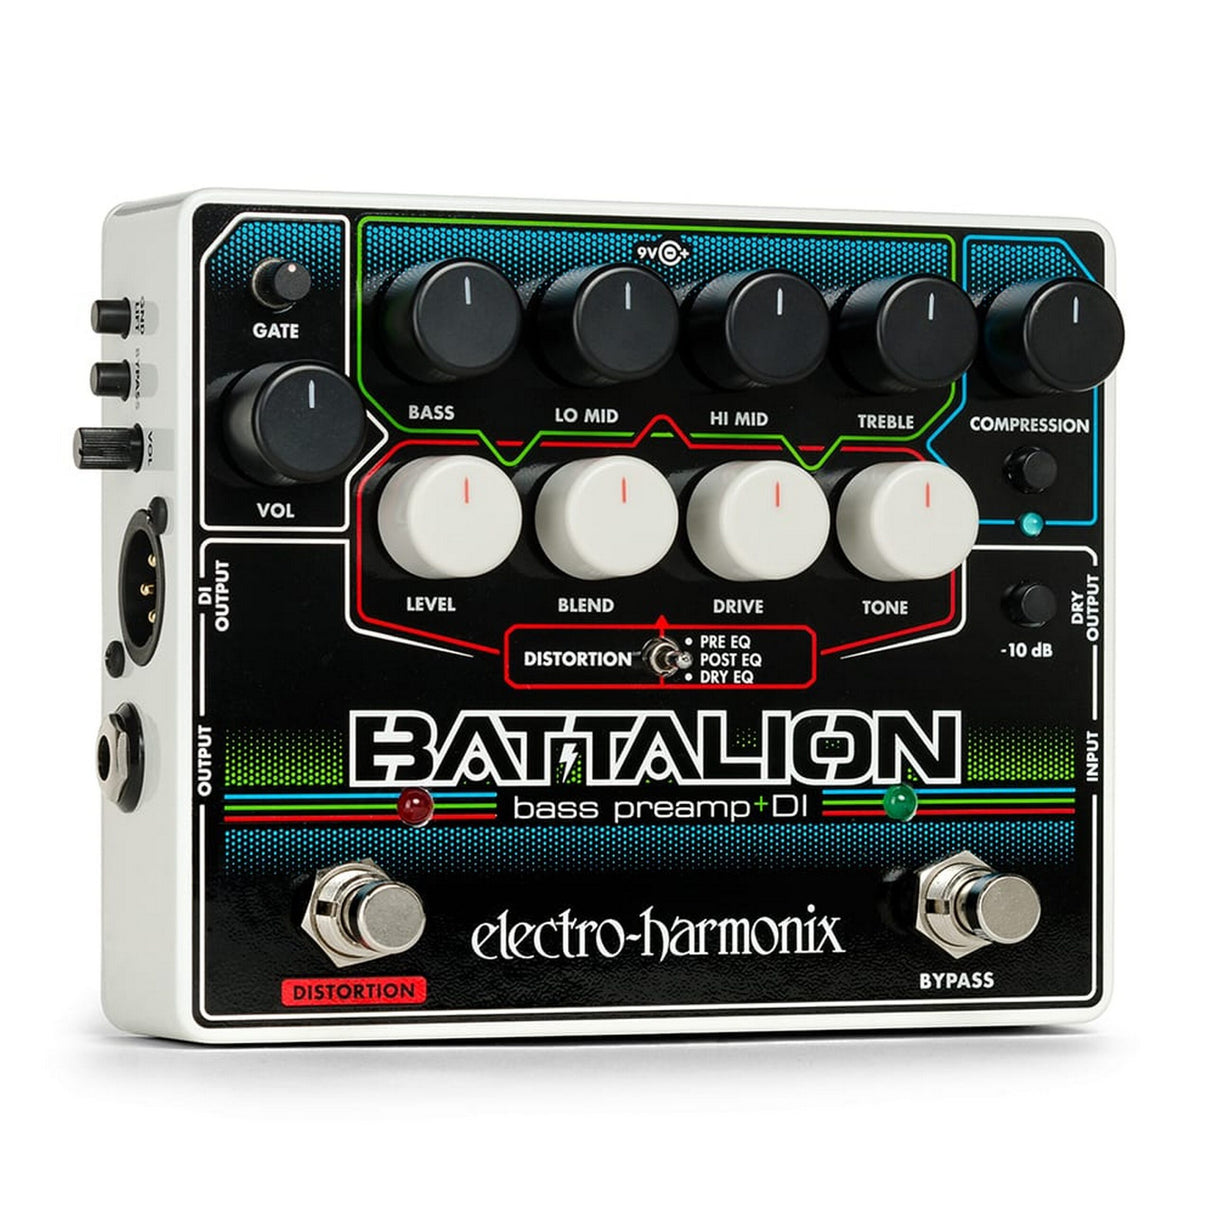 Electro-Harmonix Battalion Bass Preamp and DI Effects Pedal